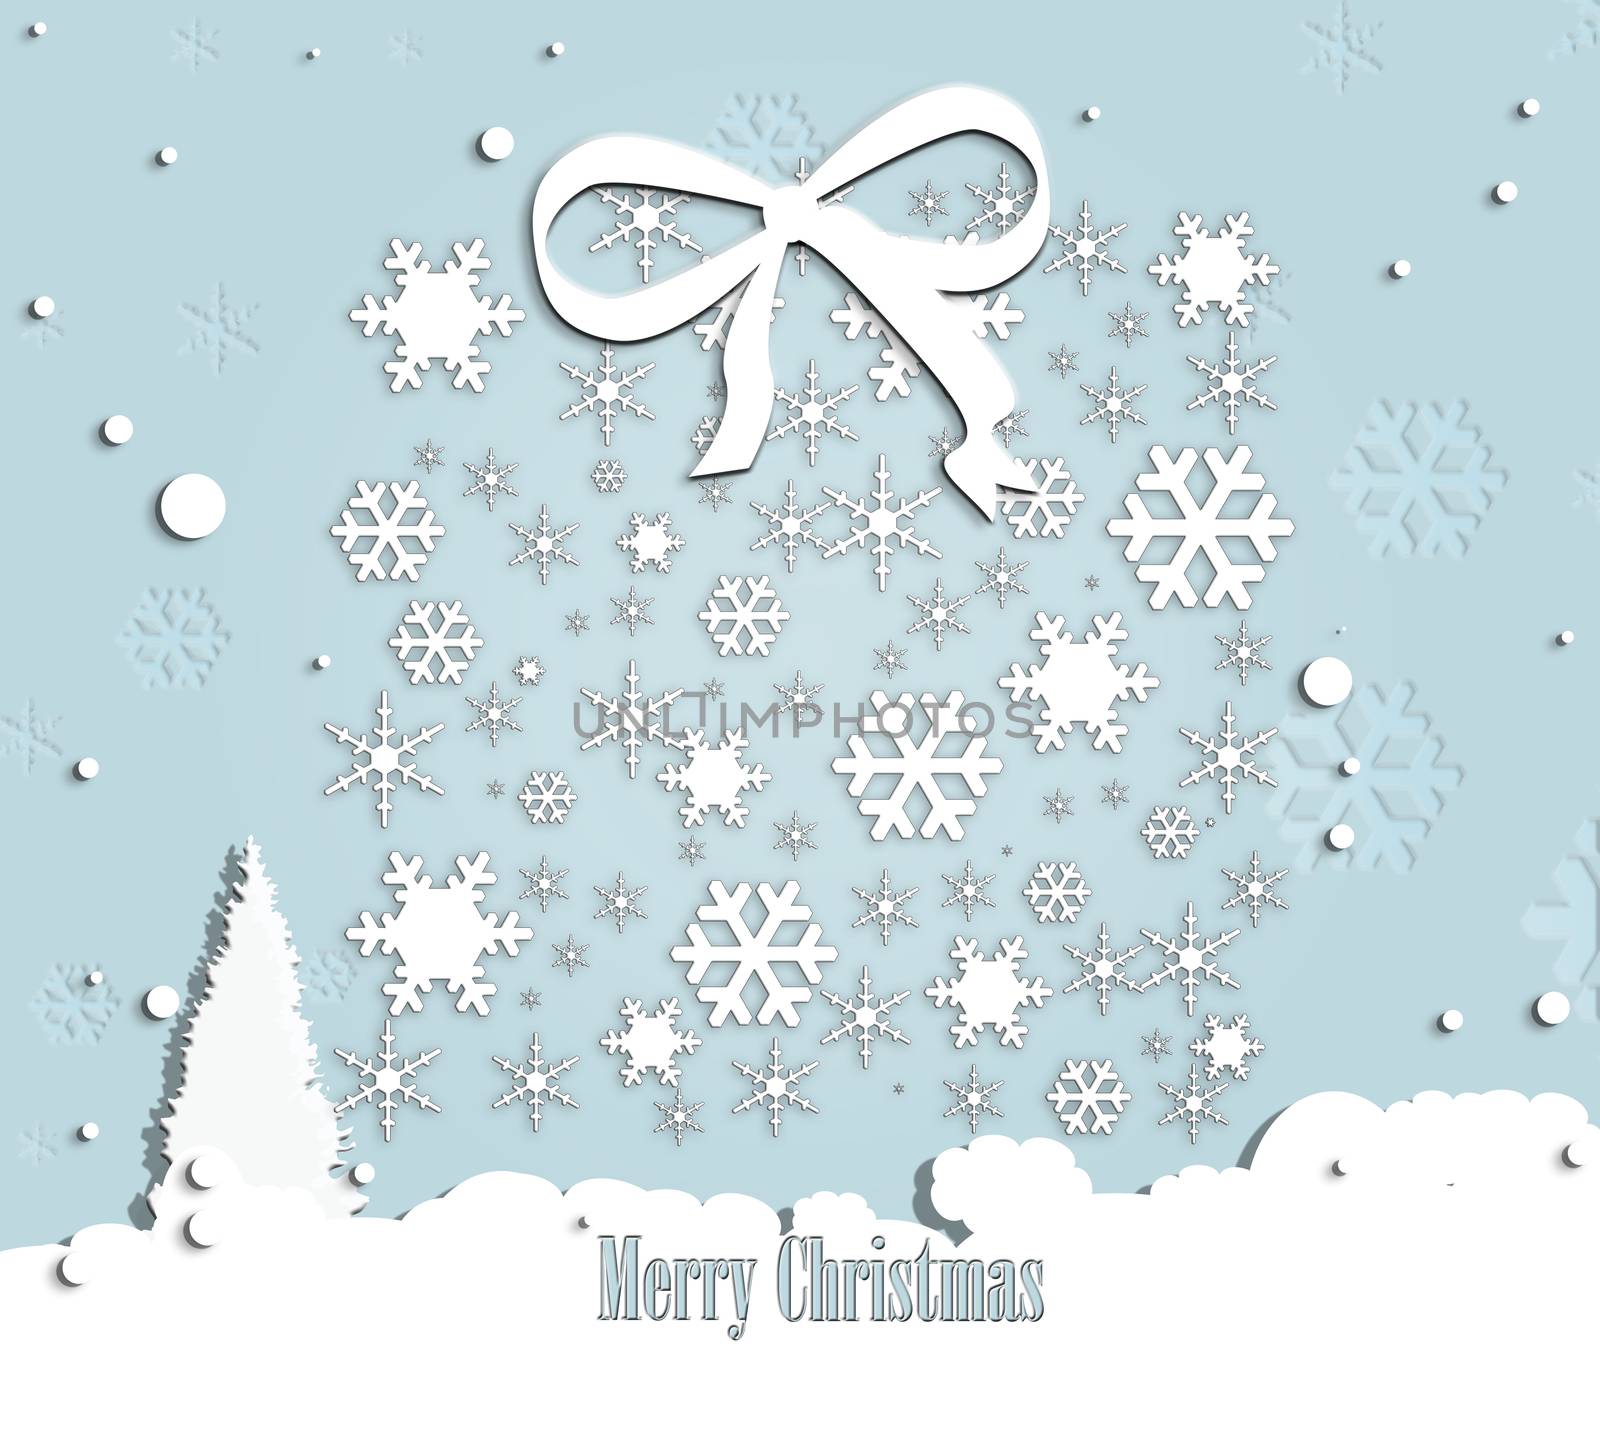 Blue Christmas background with snowflakes, snow and Christmas tree. Text Merry Christmas. Xmas elegant card. 3D illustration.